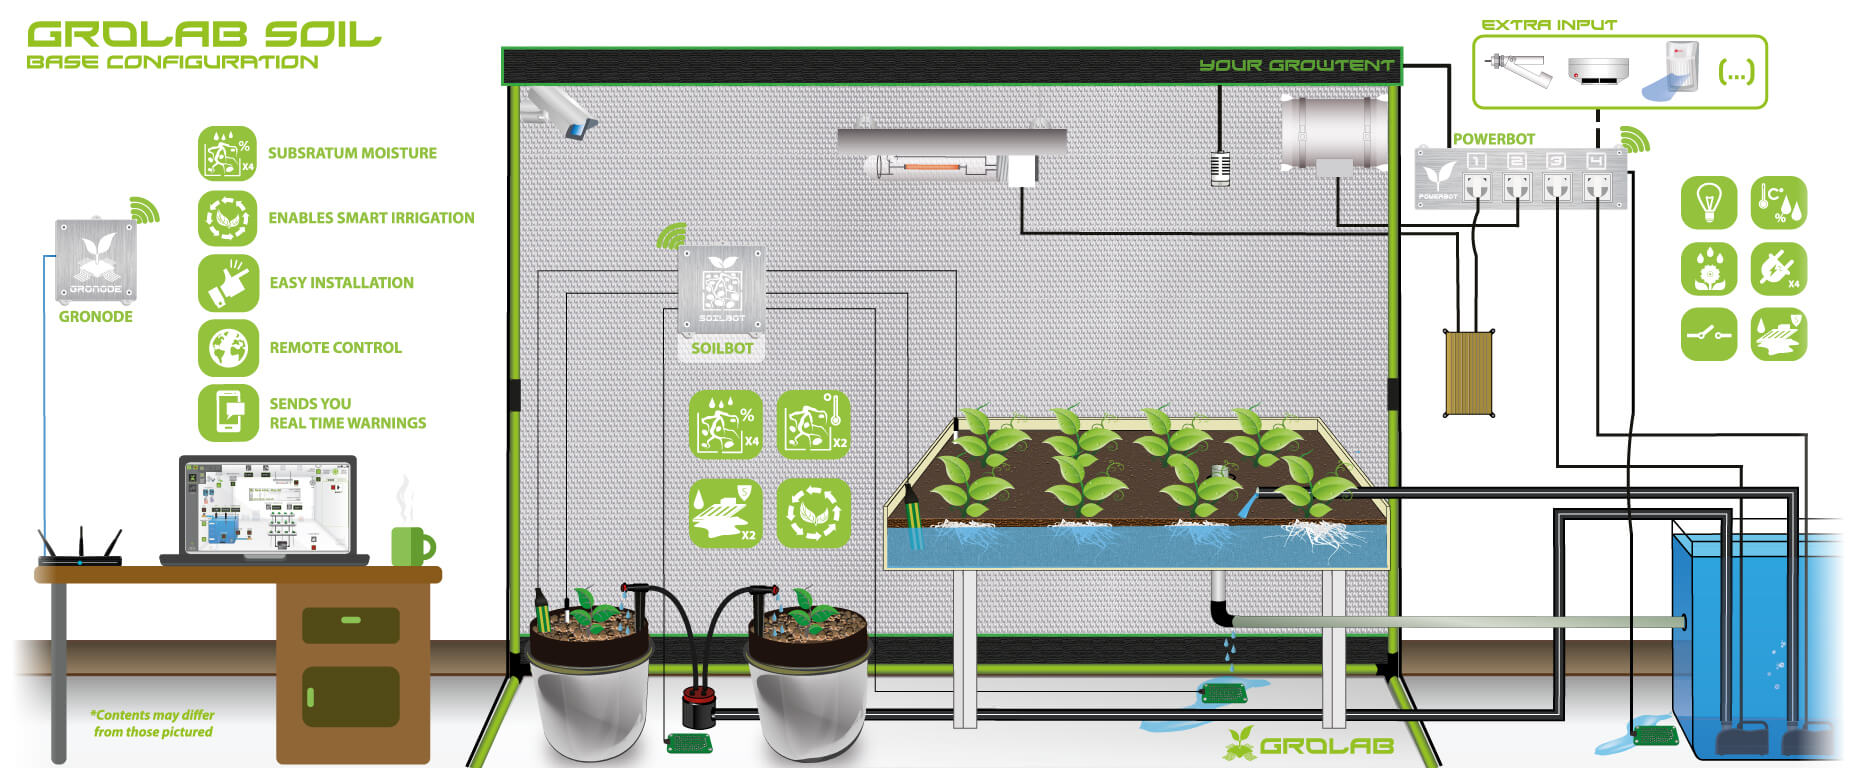 GroLab Soil Kit Base Configuration, with PowerBot controlling light, irrigation and ventilation and SoilBot moisture, temperature and flood